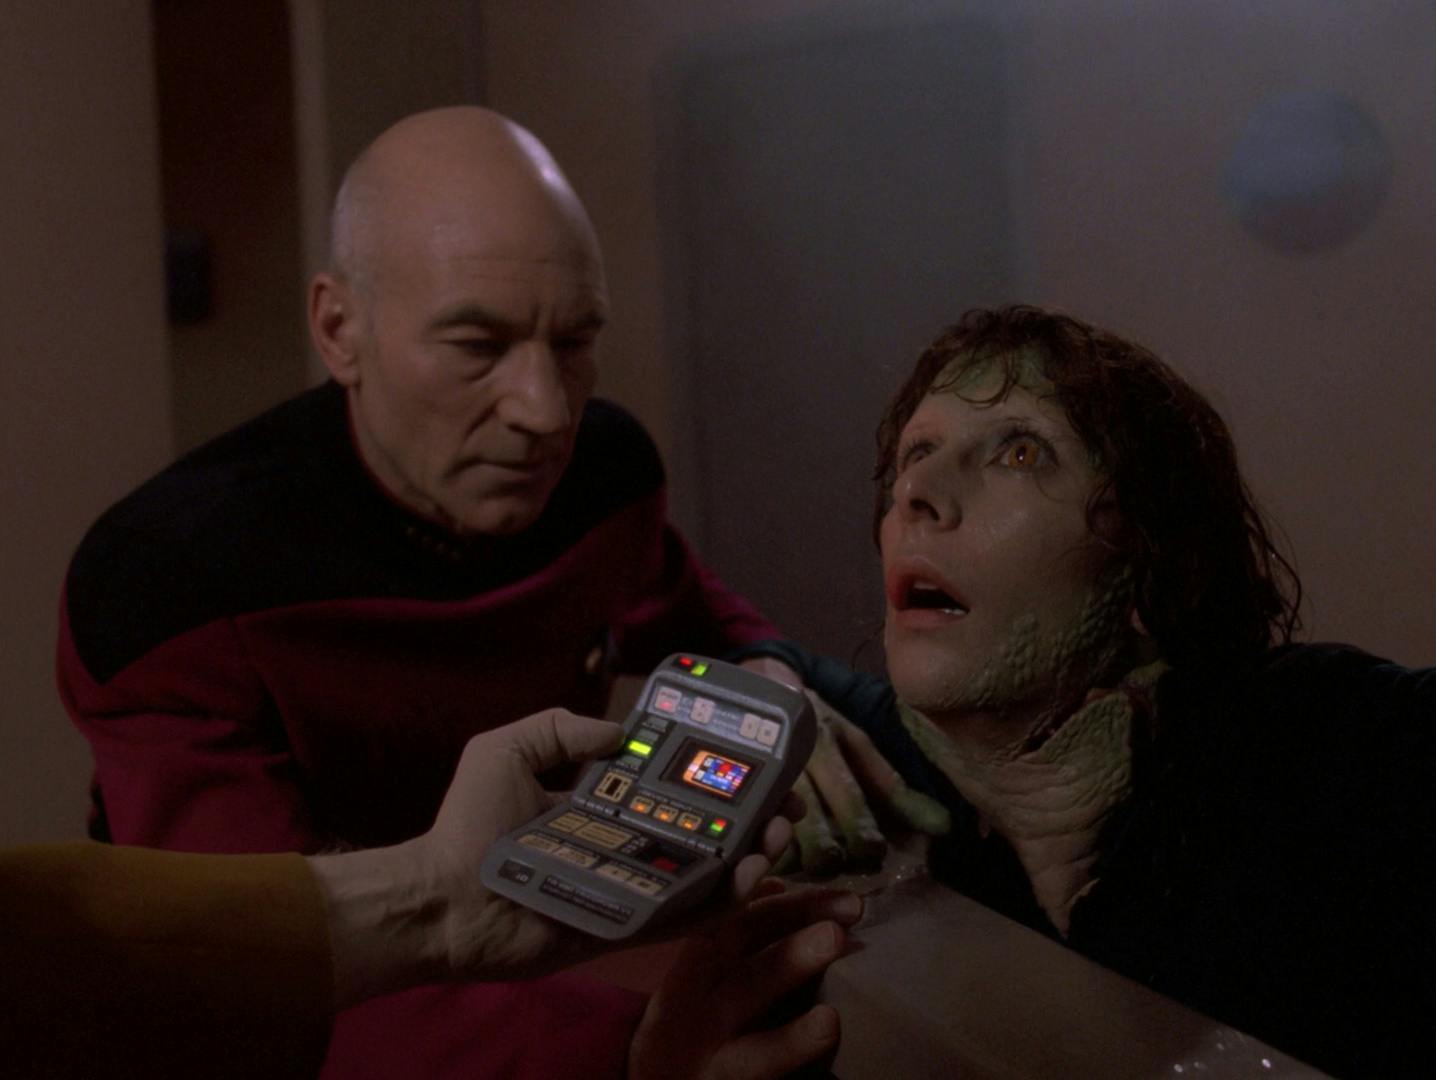 Data analyzes Deanna Troi's de-evolution into an amphibian as Picard expresses concern for his crew in 'Genesis'